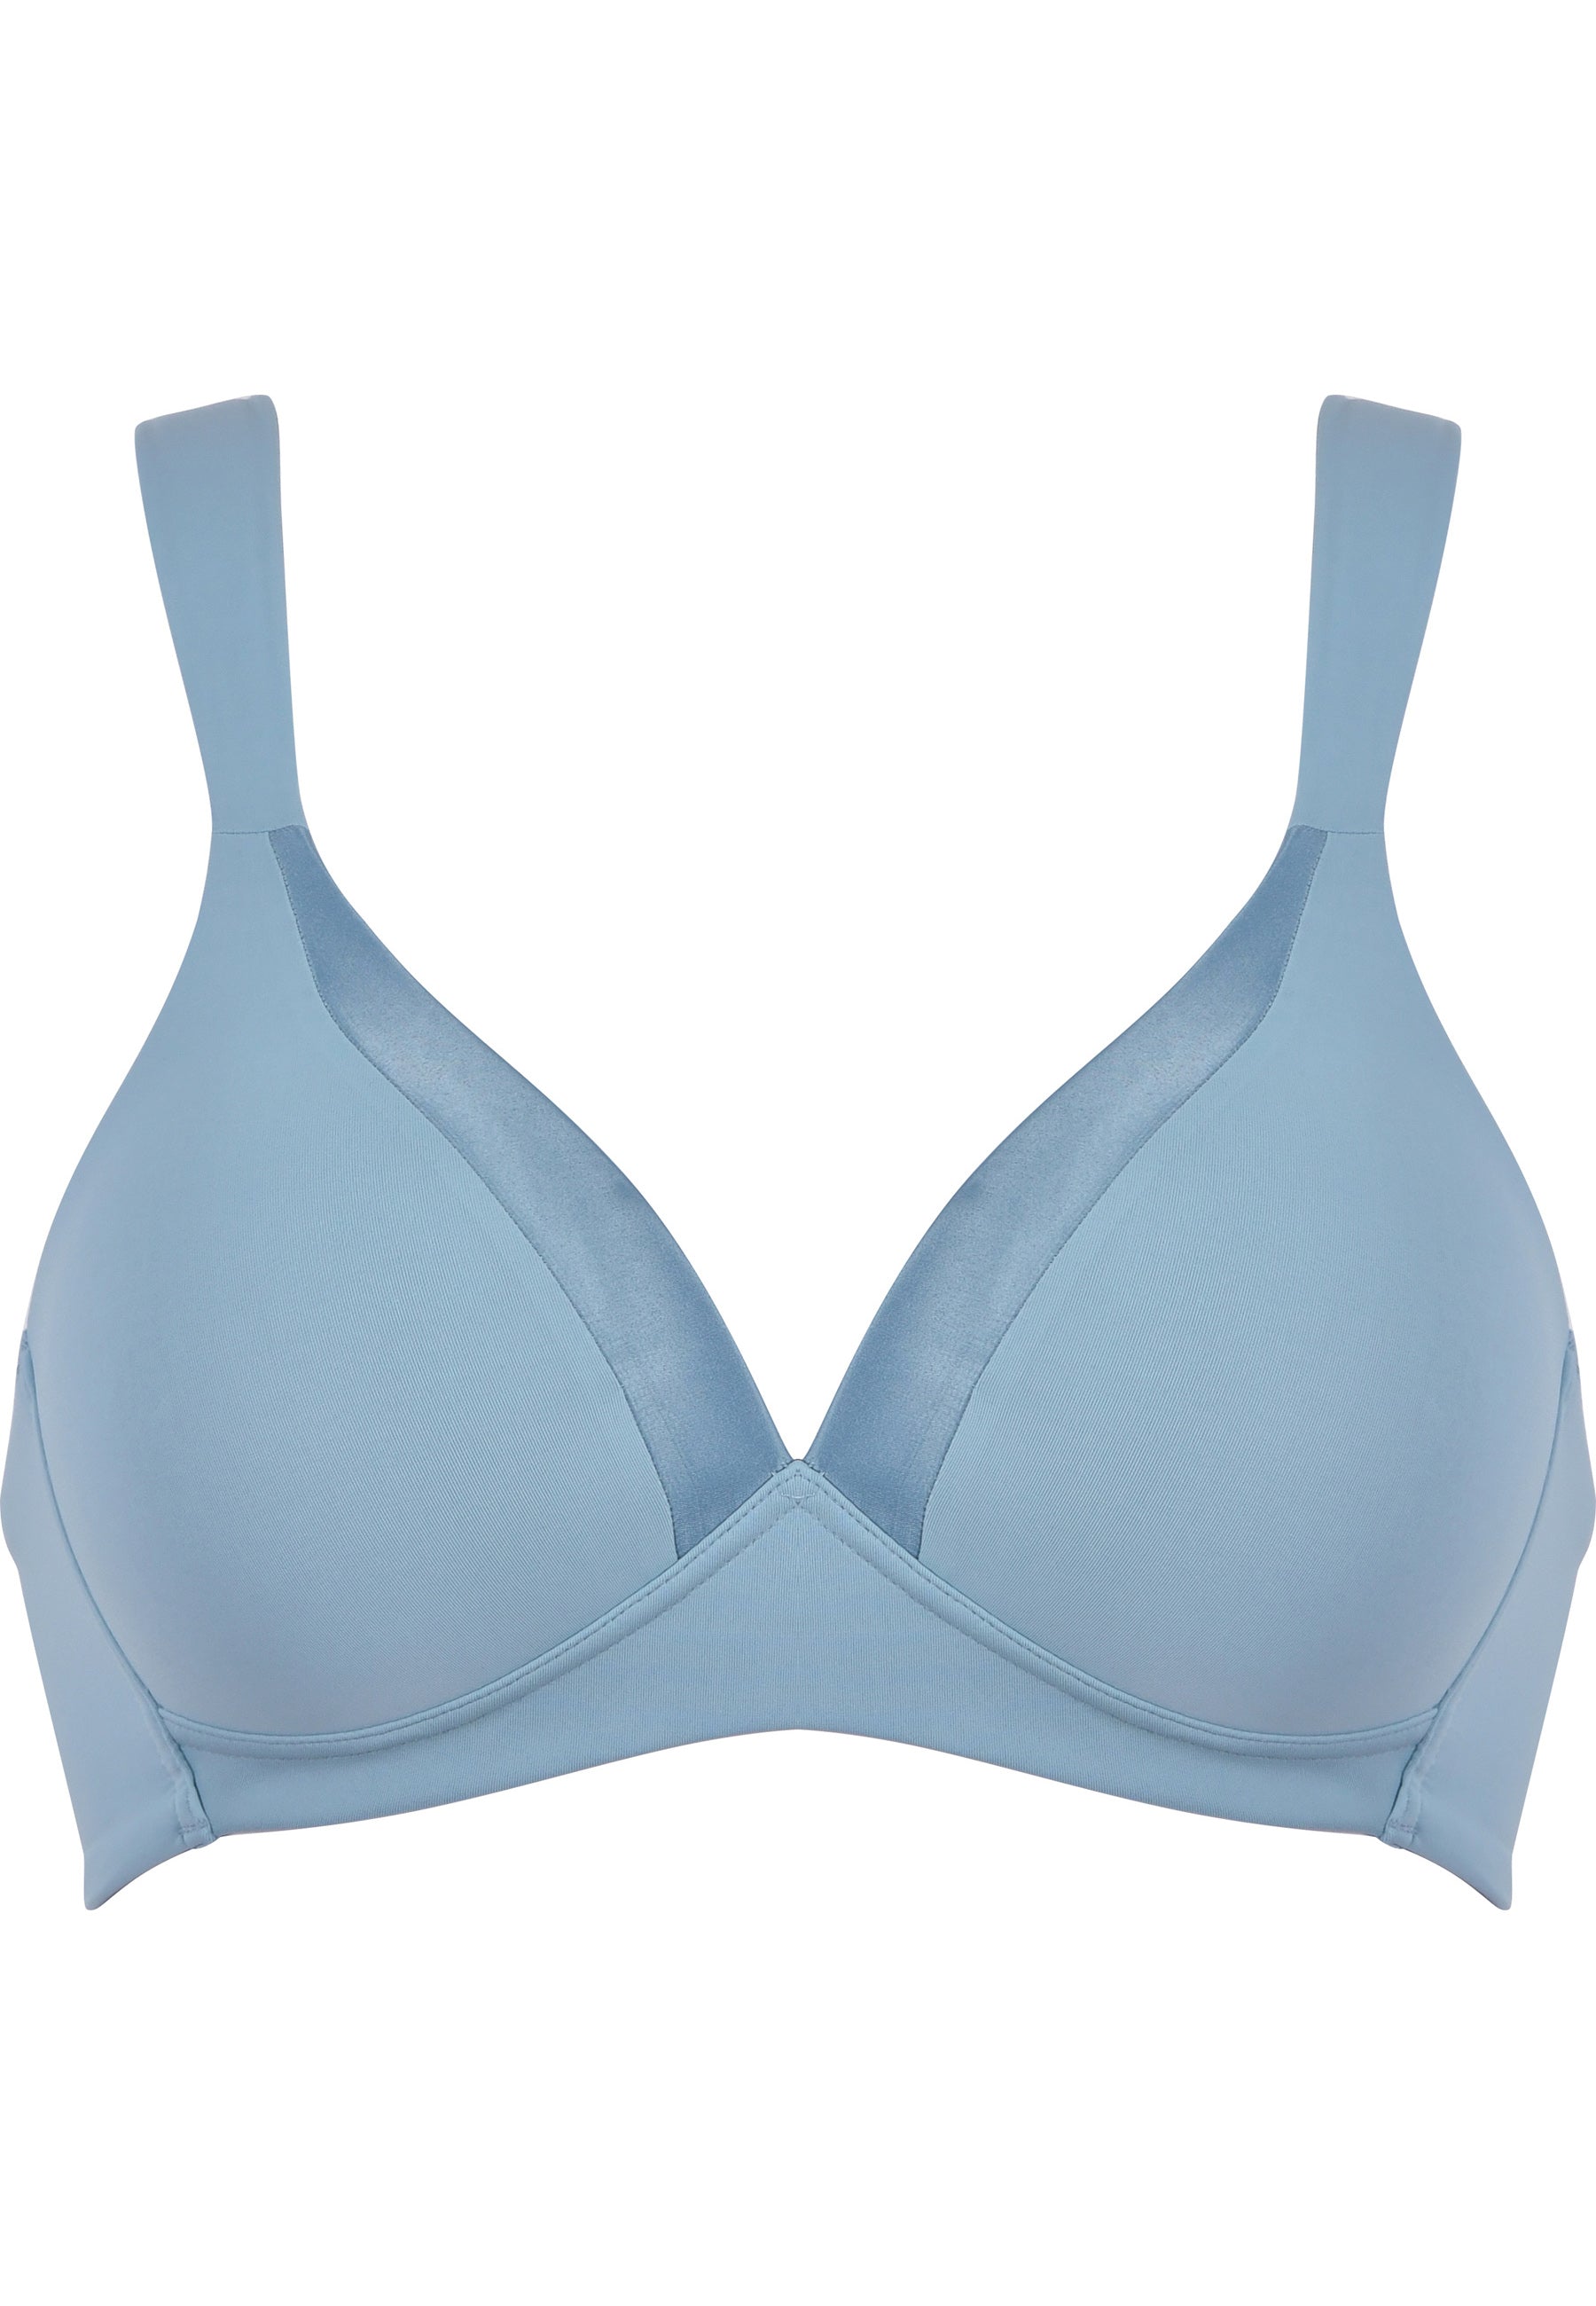 Non-Wired Bra with Cup and Shiny Band - Matcha Sorbet